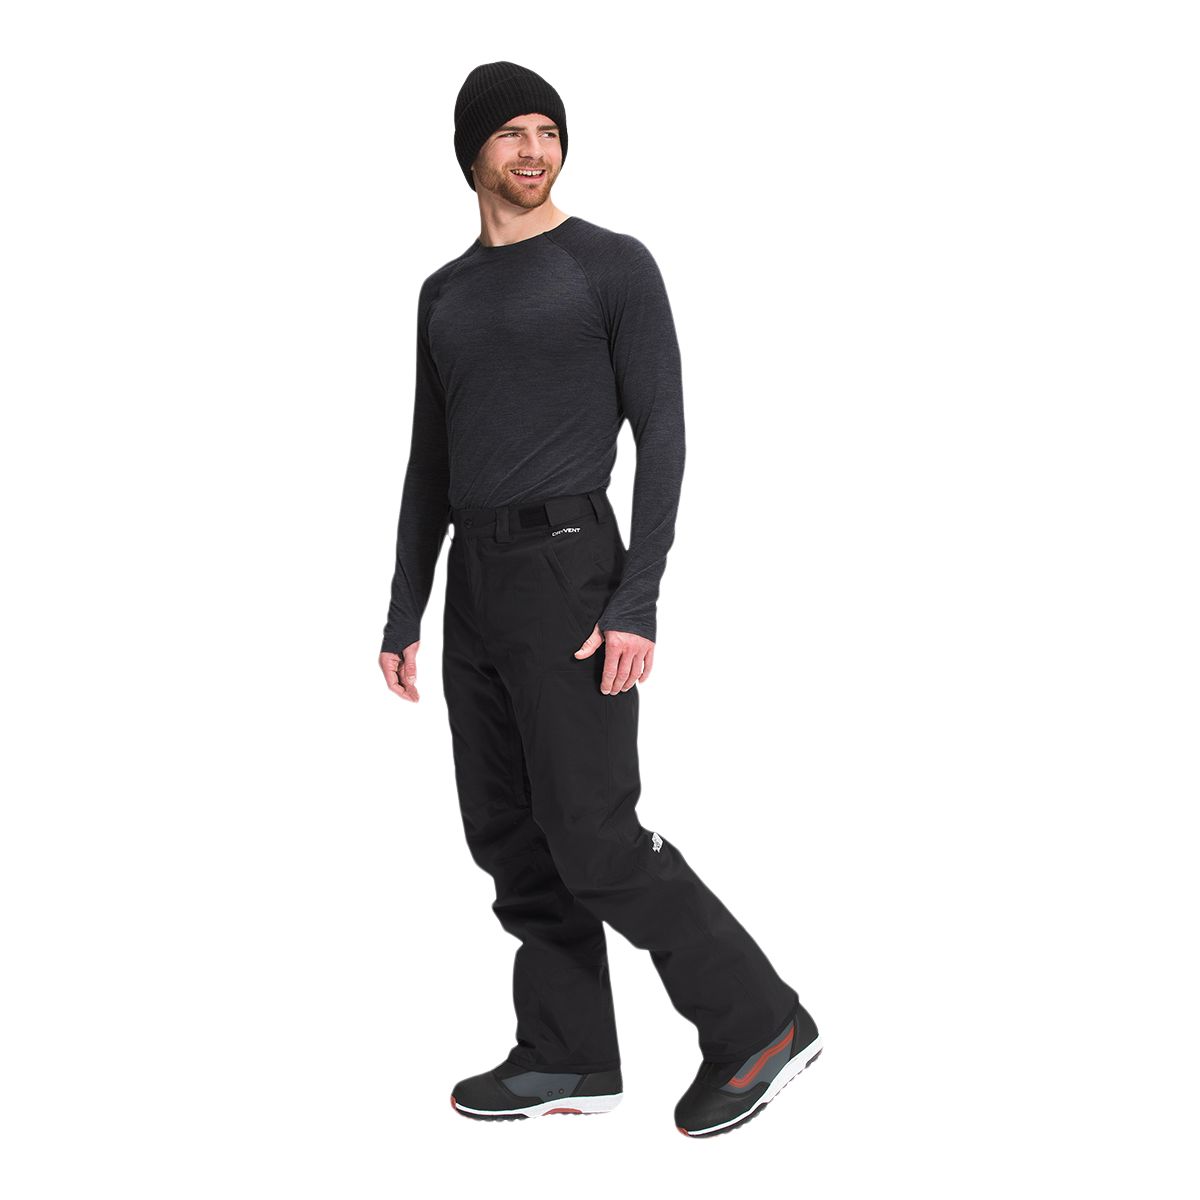 The North Face Men's Freedom Insulated Pants